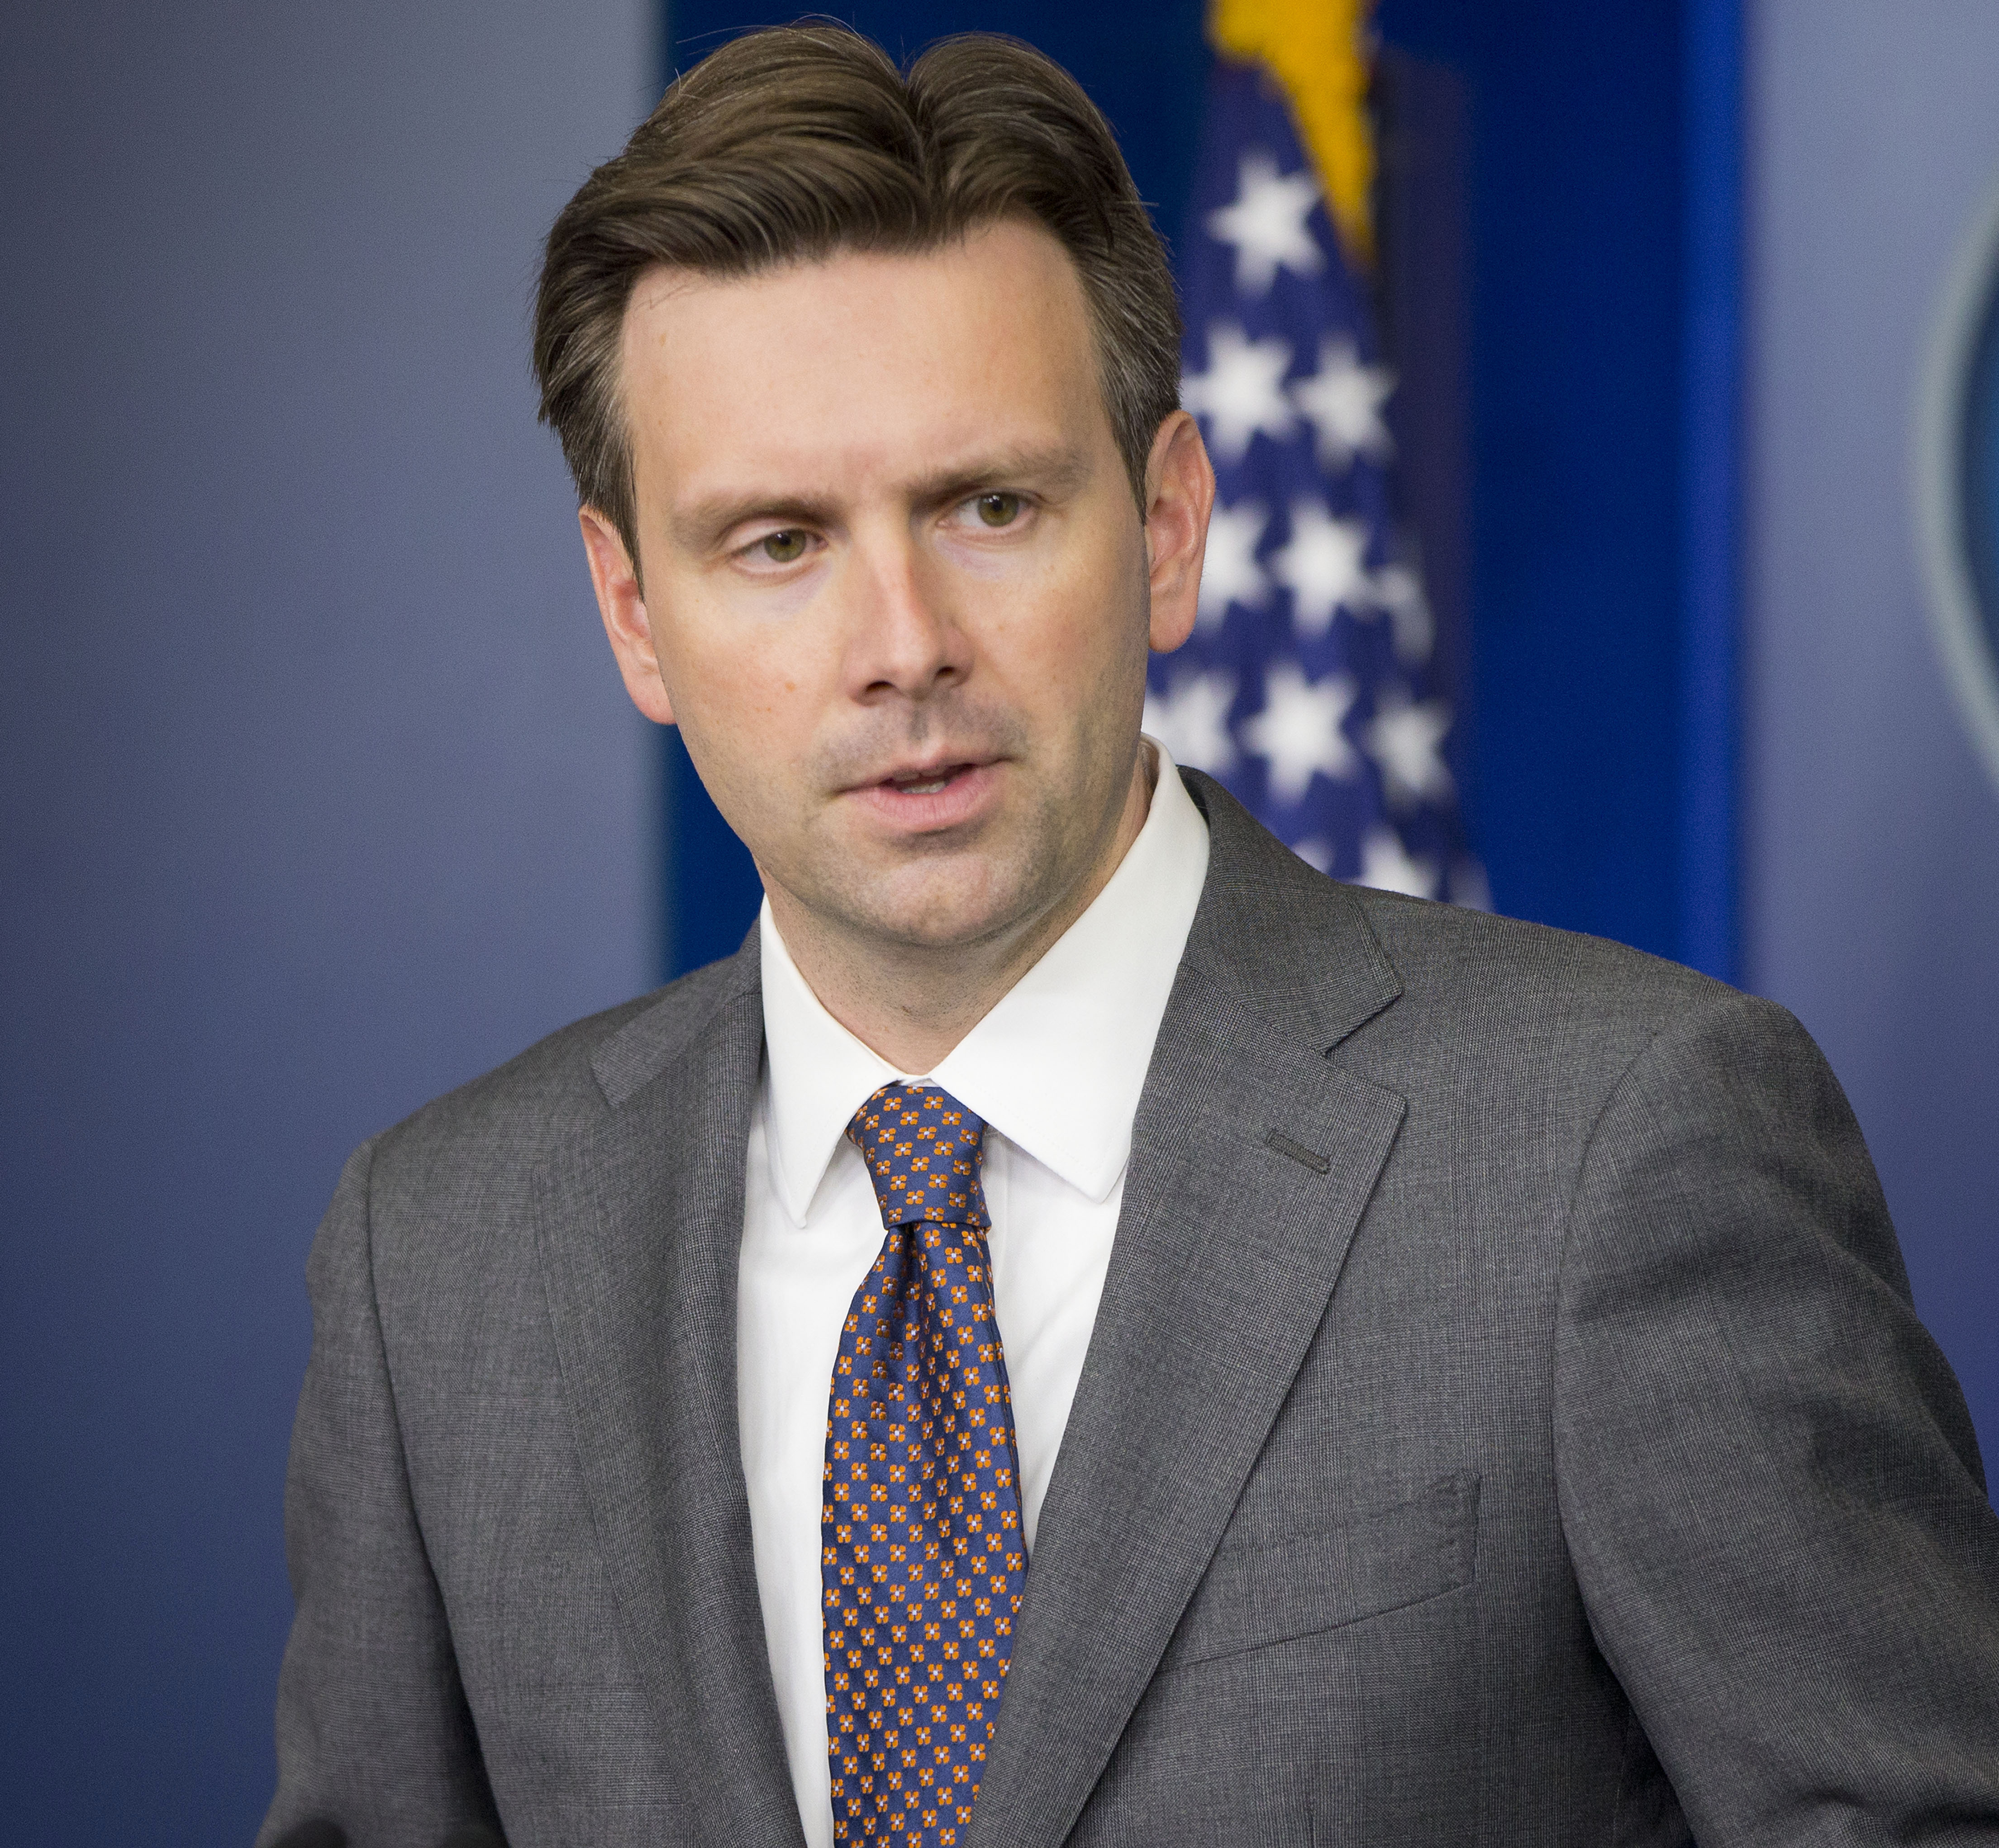 White House press secretary Josh Earnest speaks to the media during the daily briefing in the Brady Press Briefing Room of the White House (Pablo Martinez Monsivais—AP)